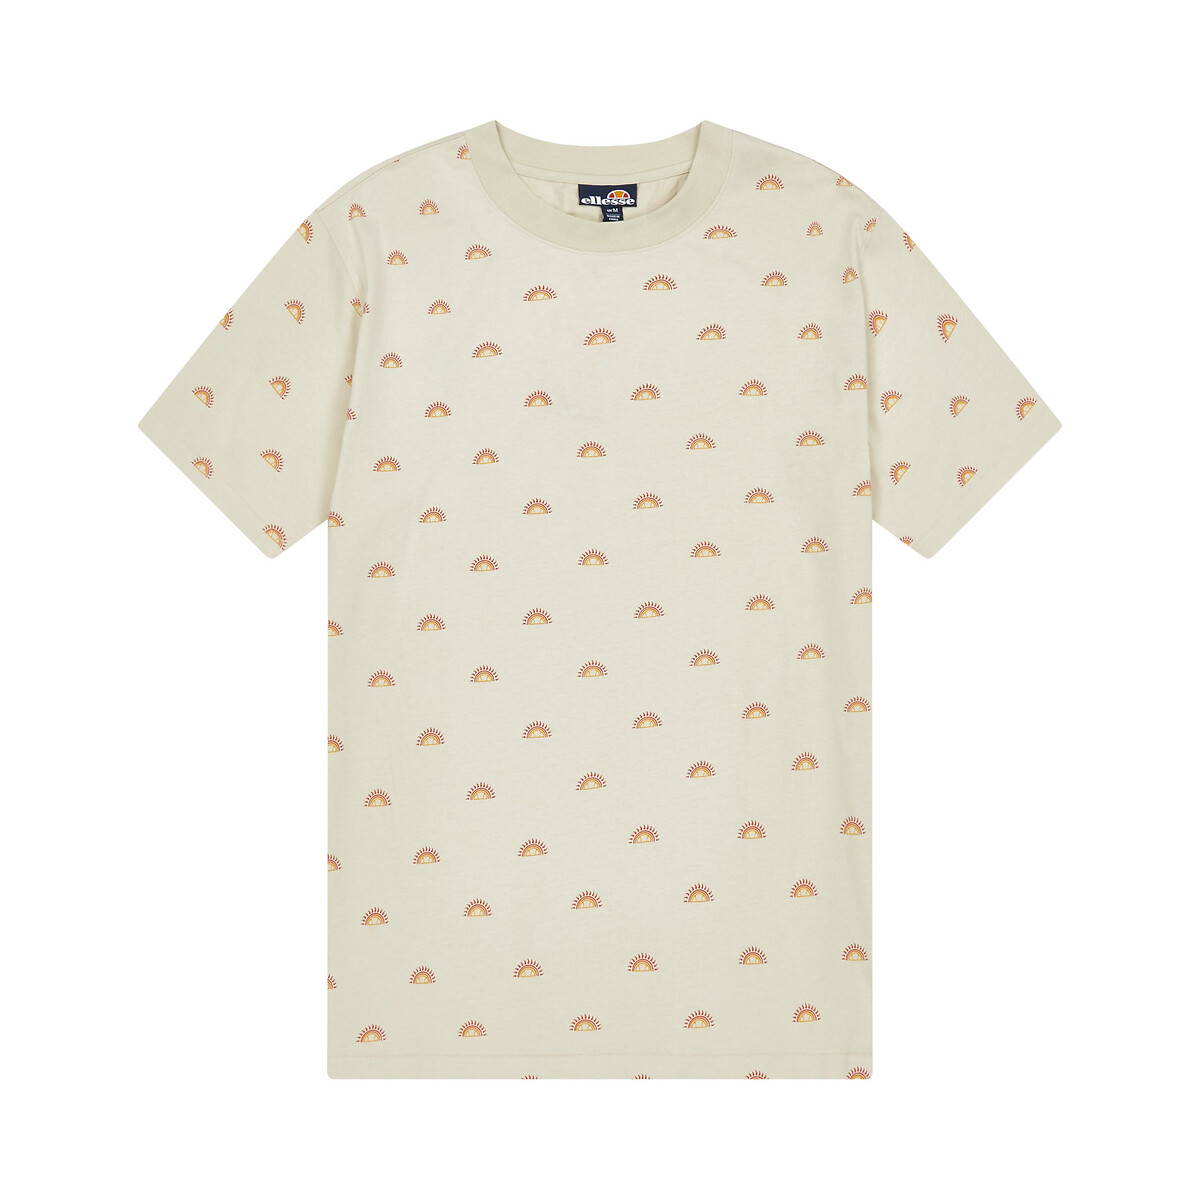 Printed Cotton T-Shirt with Crew Neck and Short Sleeves